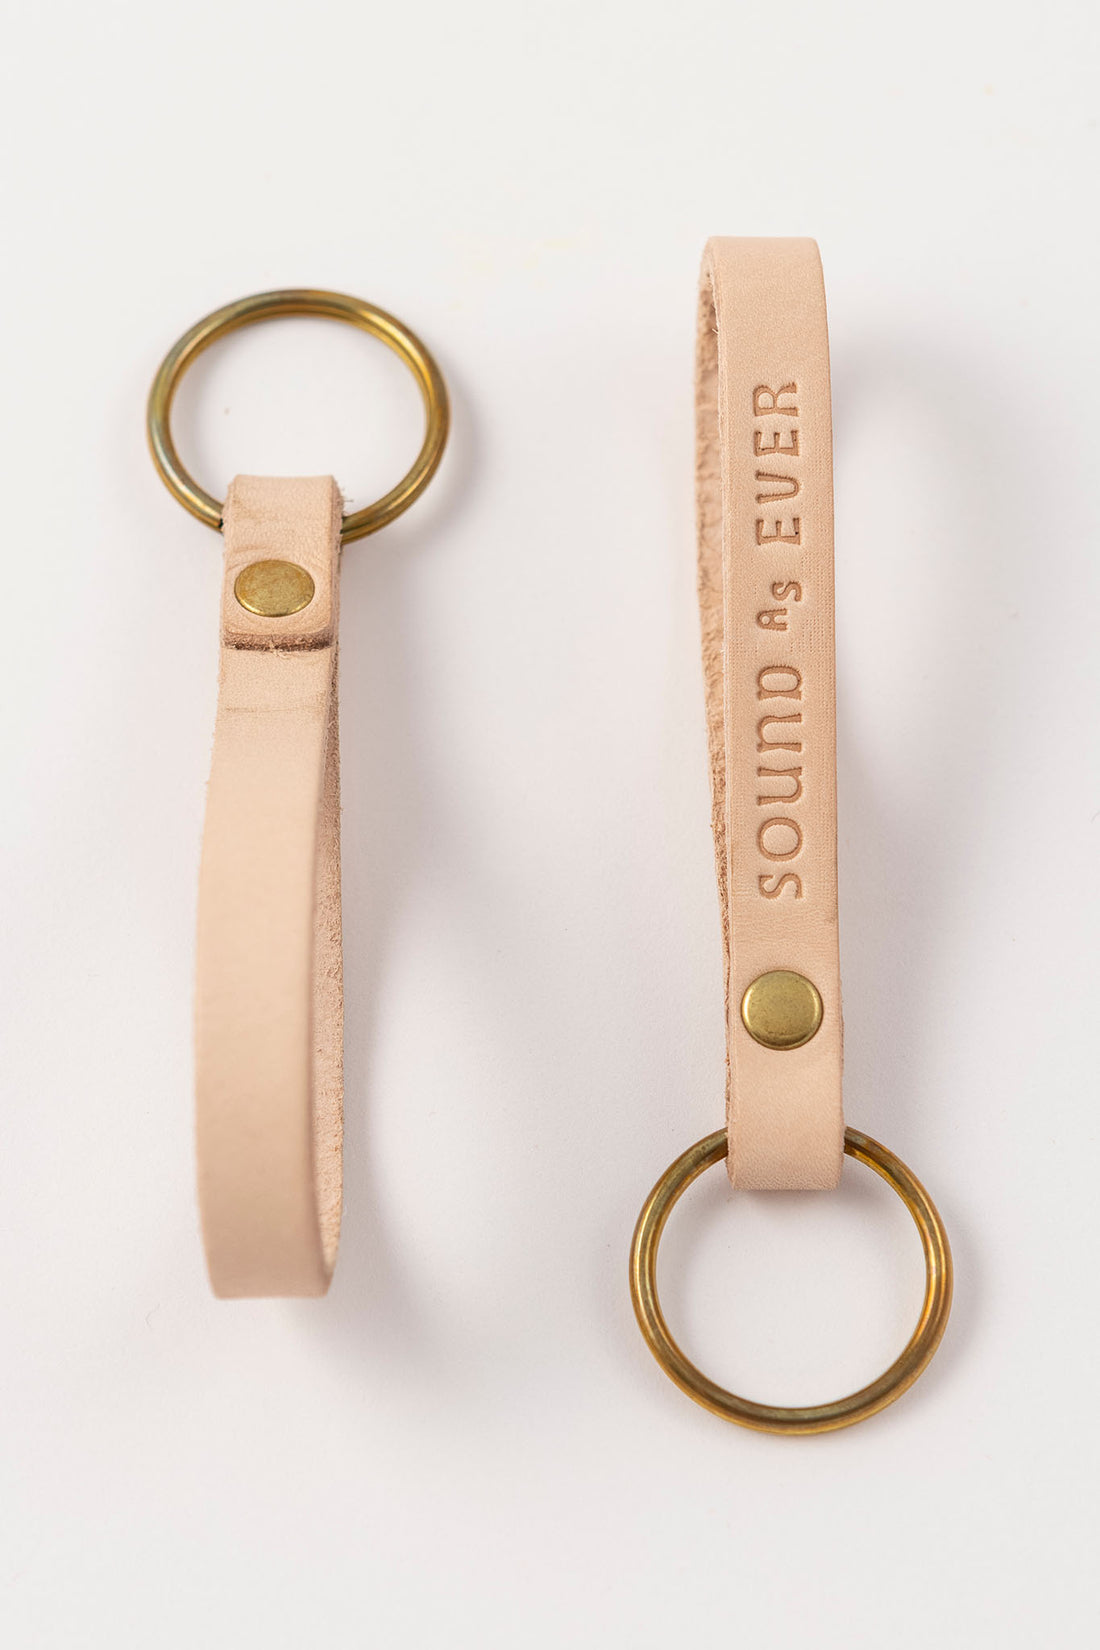 Tan color leather keychain with brass ring stamped with text "Sound as Ever"